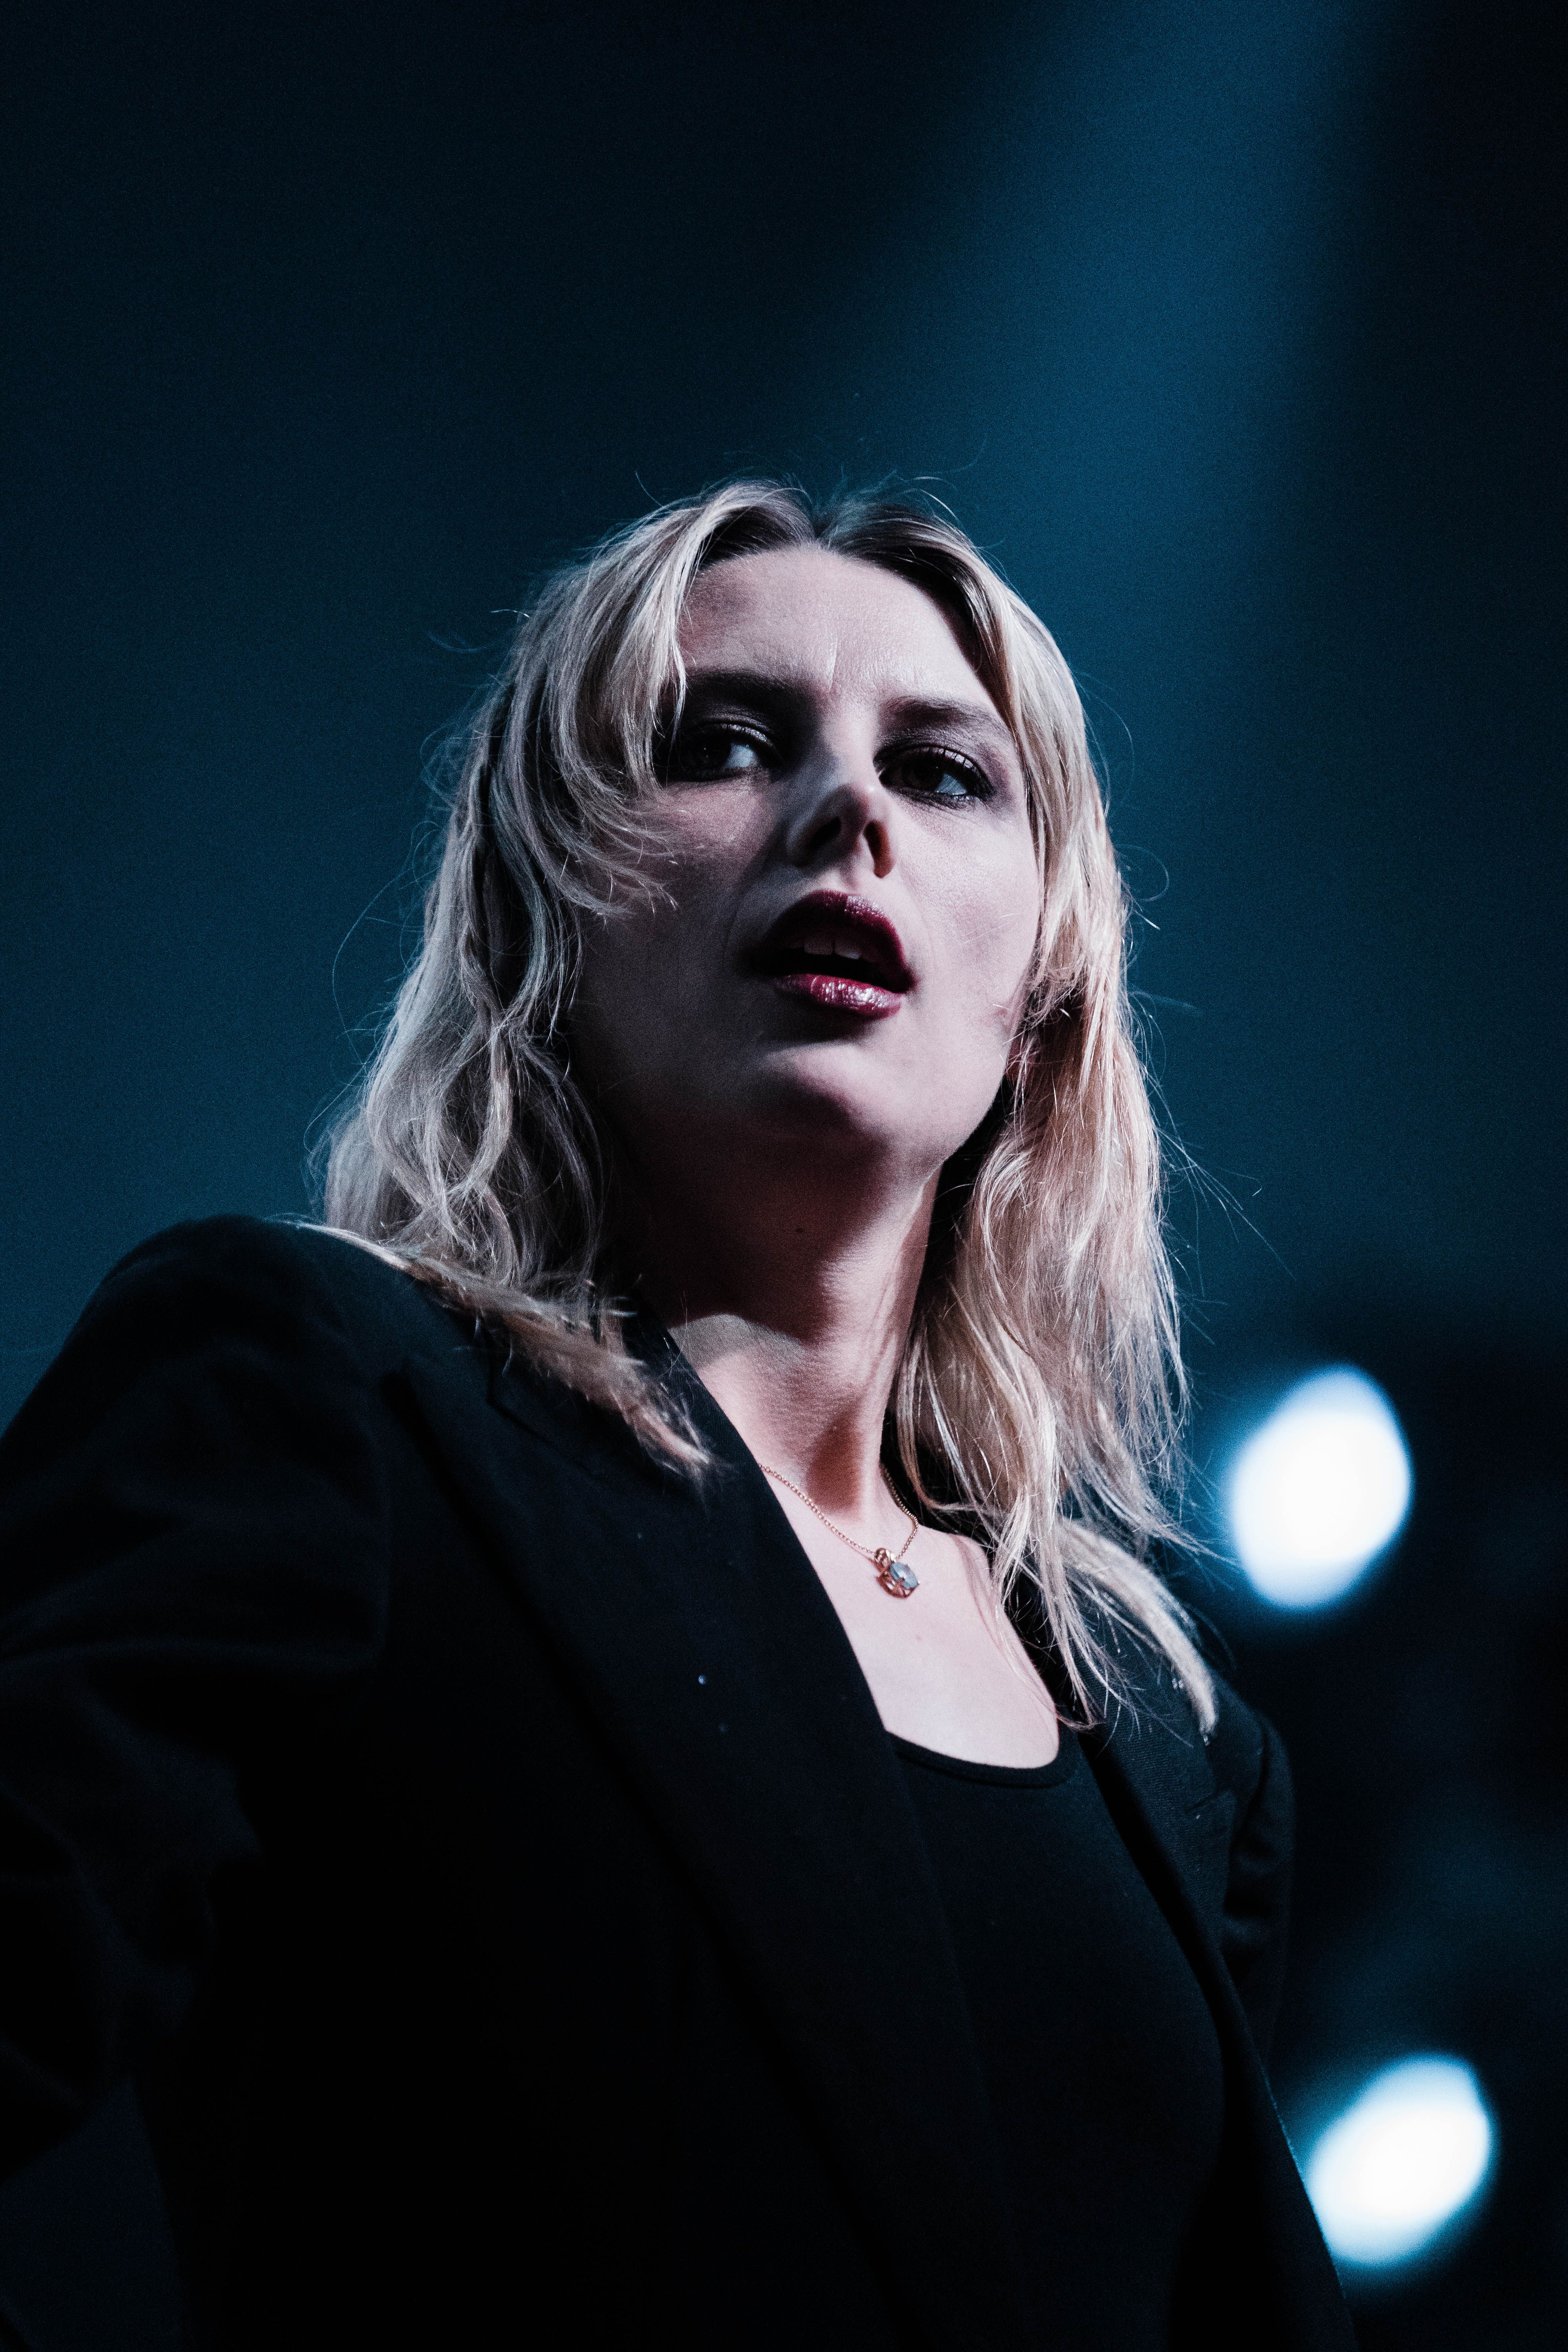 Concert Review: Wolf Alice in Austin Texas